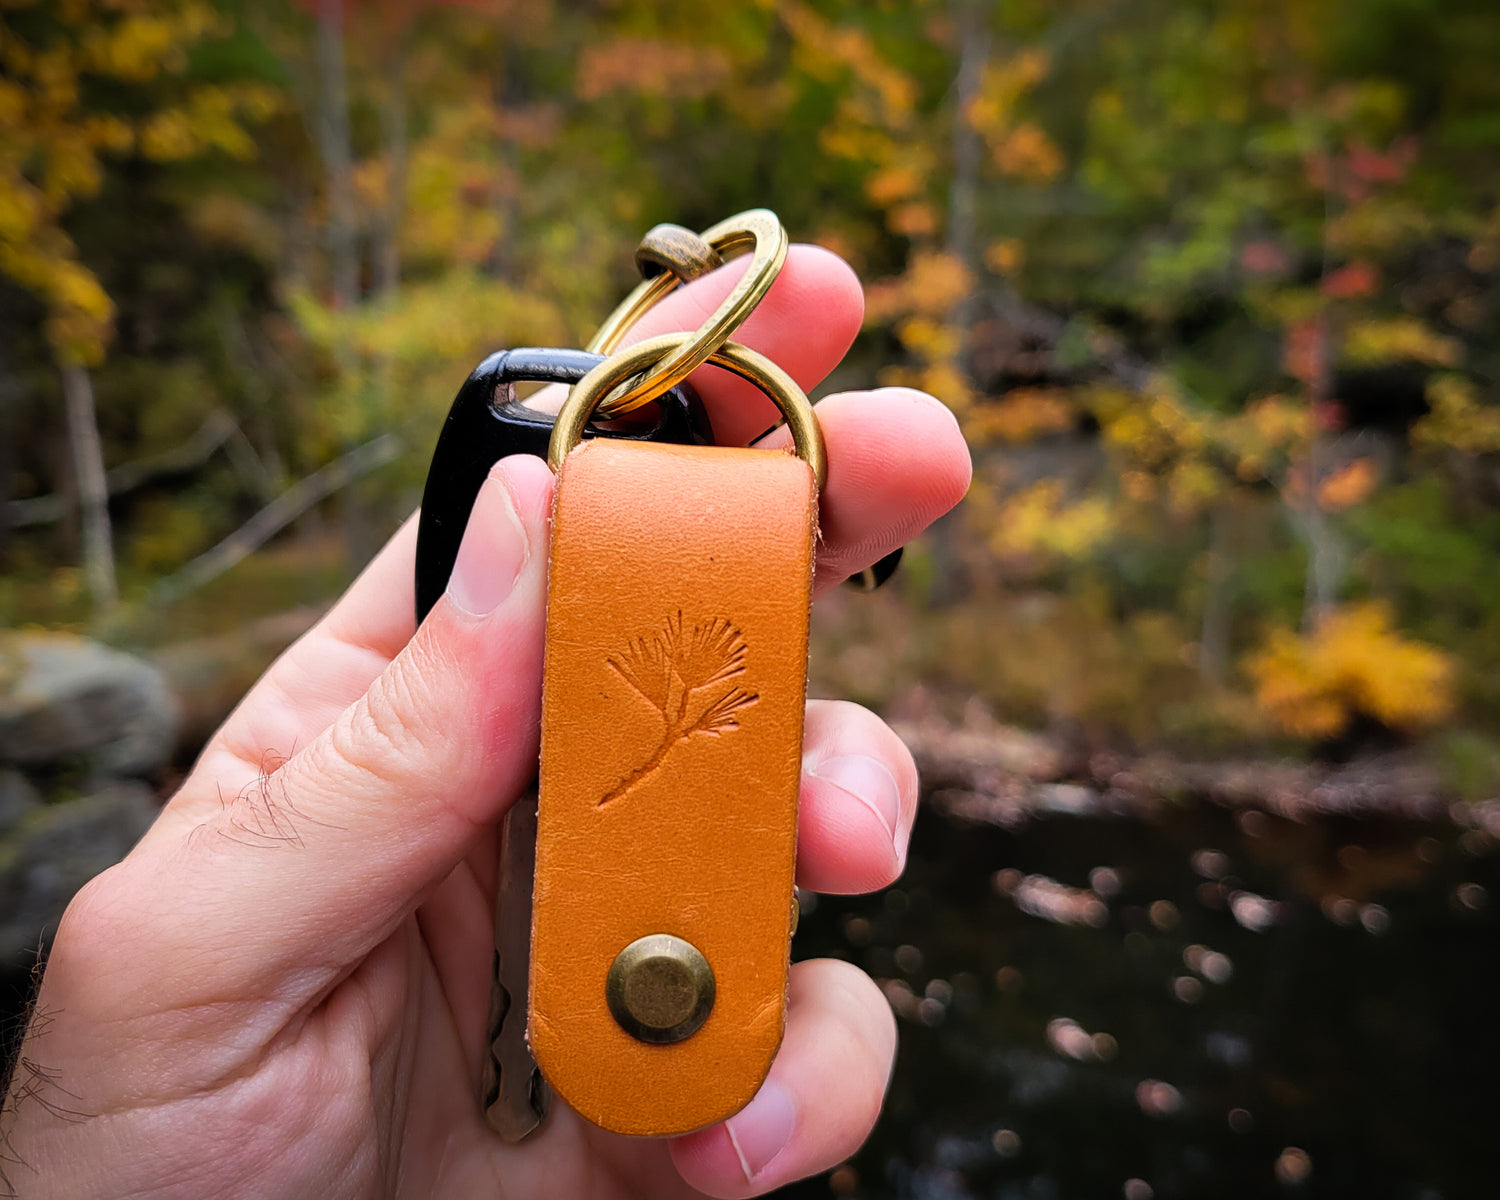 Leather EDC Key organizer with trees in background